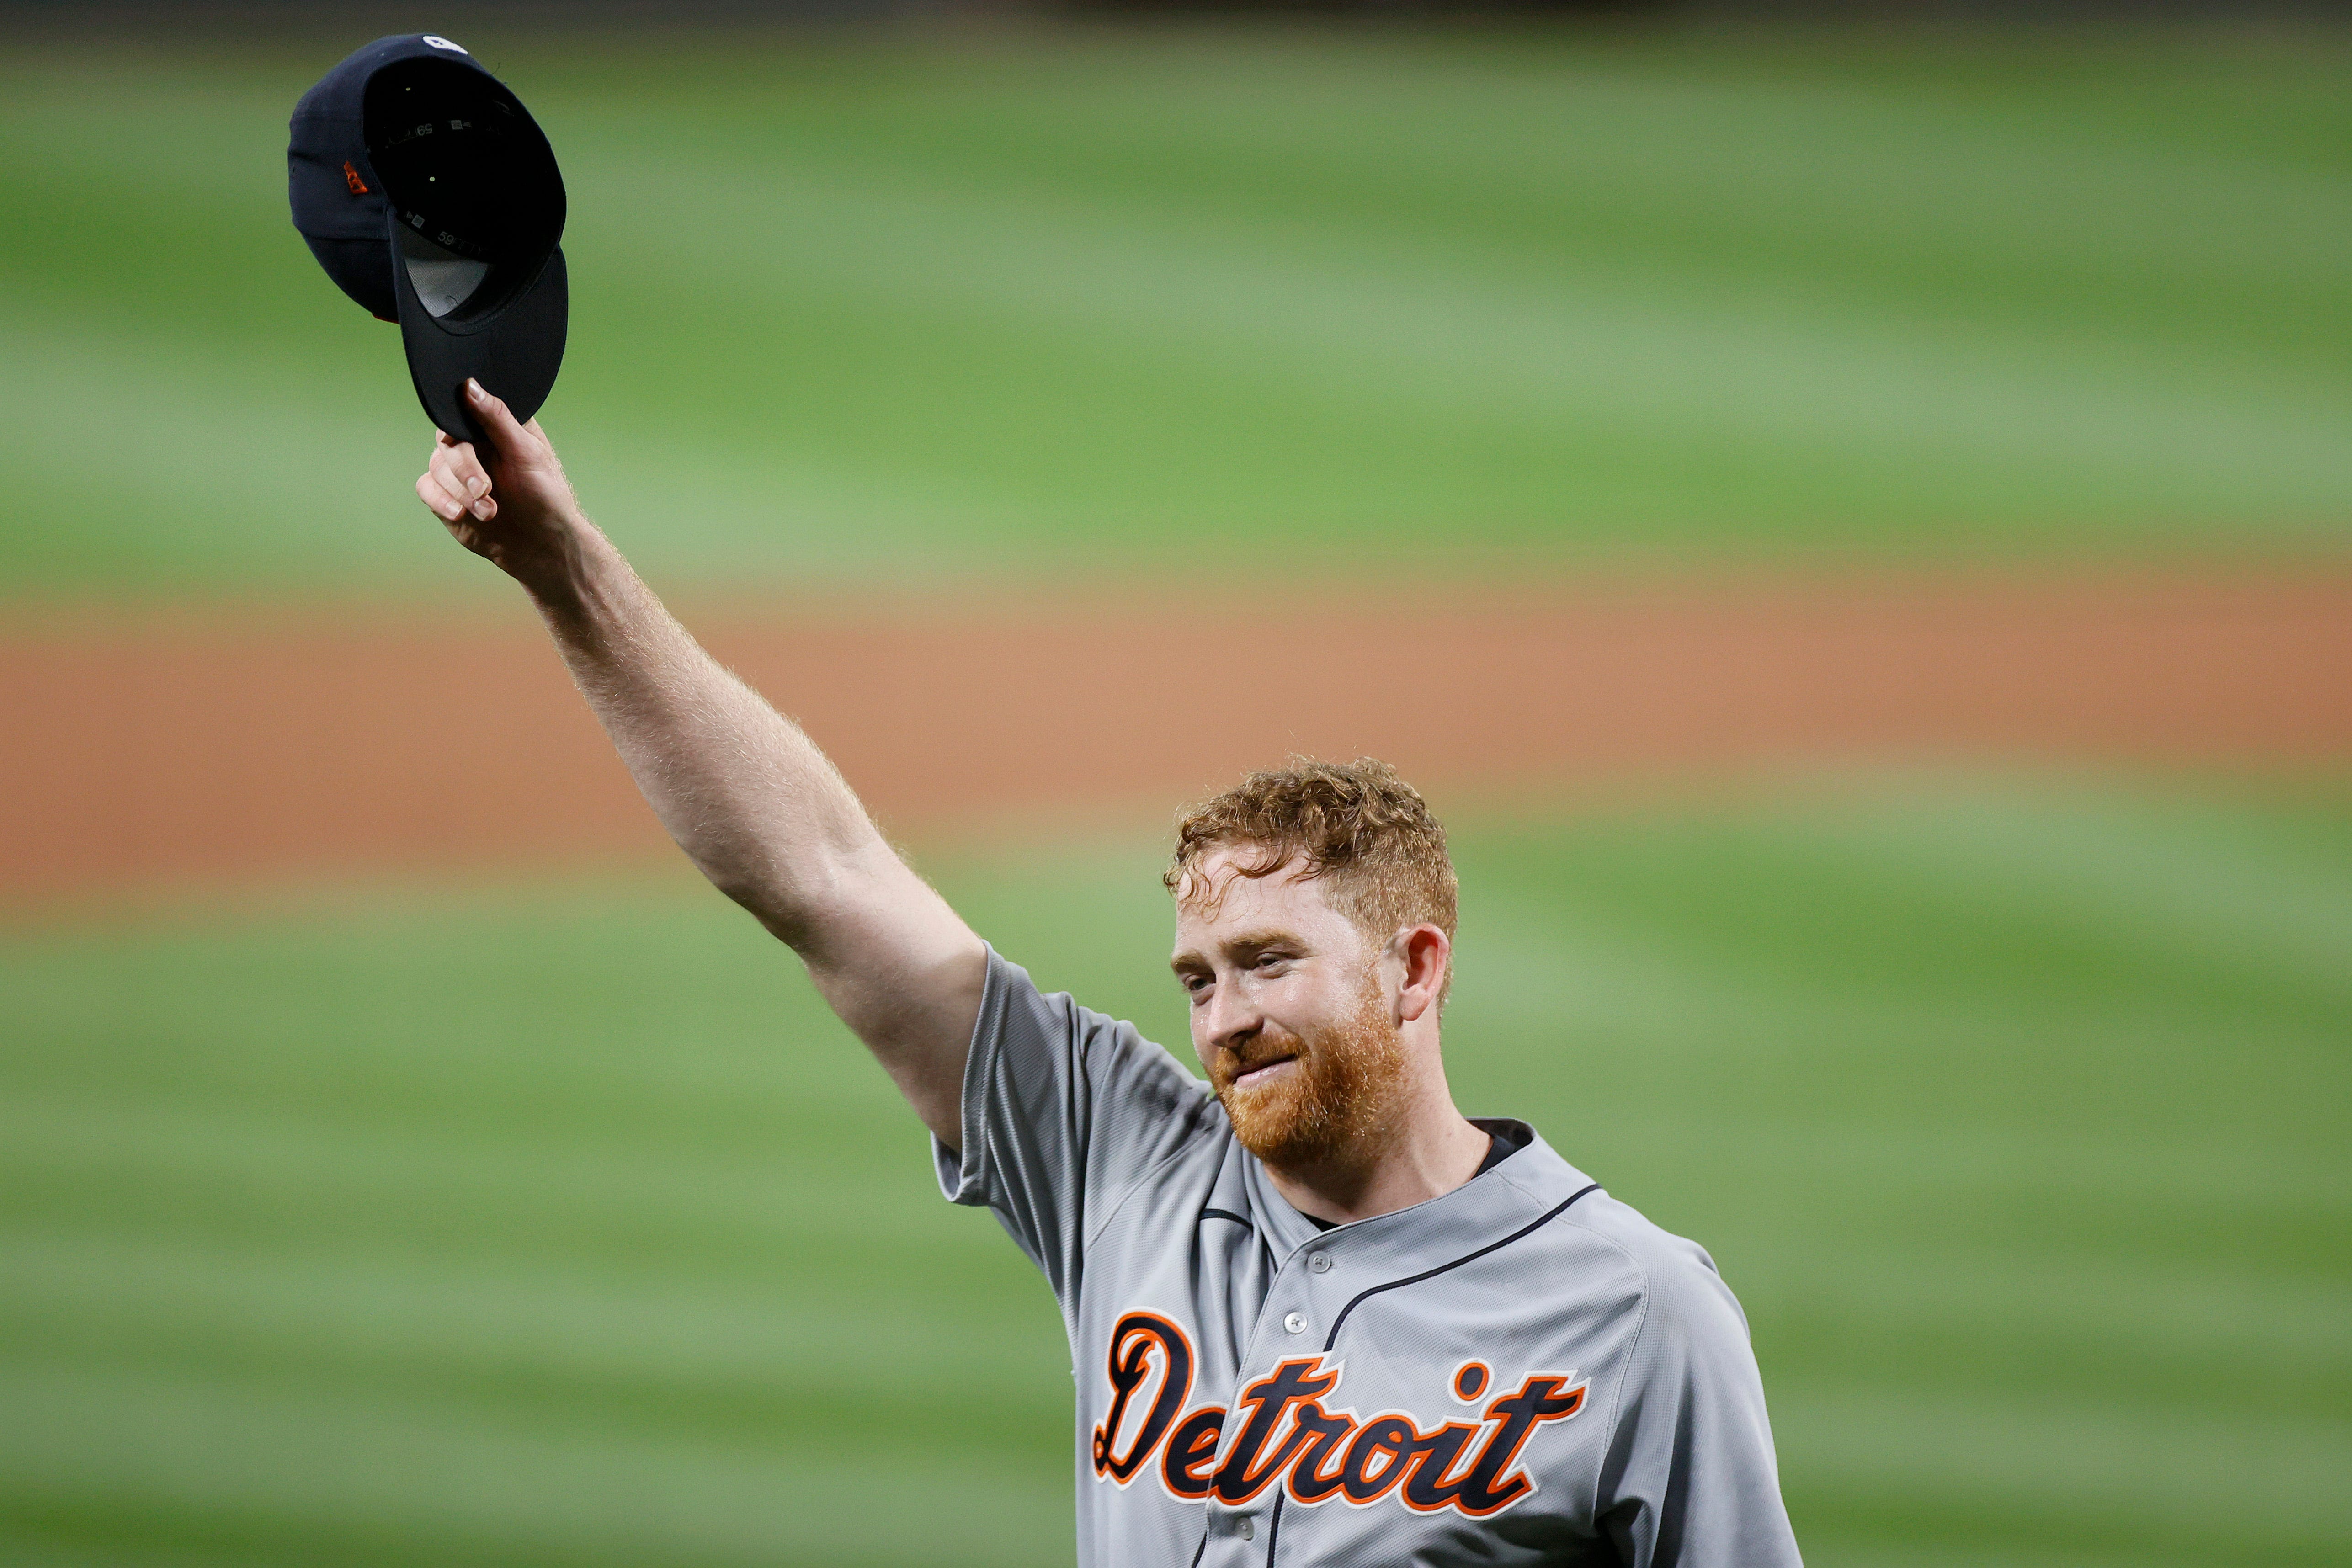 Spencer Turnbull of the Detroit Tigers celebrates after his no-hitter against the Seattle Mariners at T-Mobile Park on May 18, 2021 in Seattle.